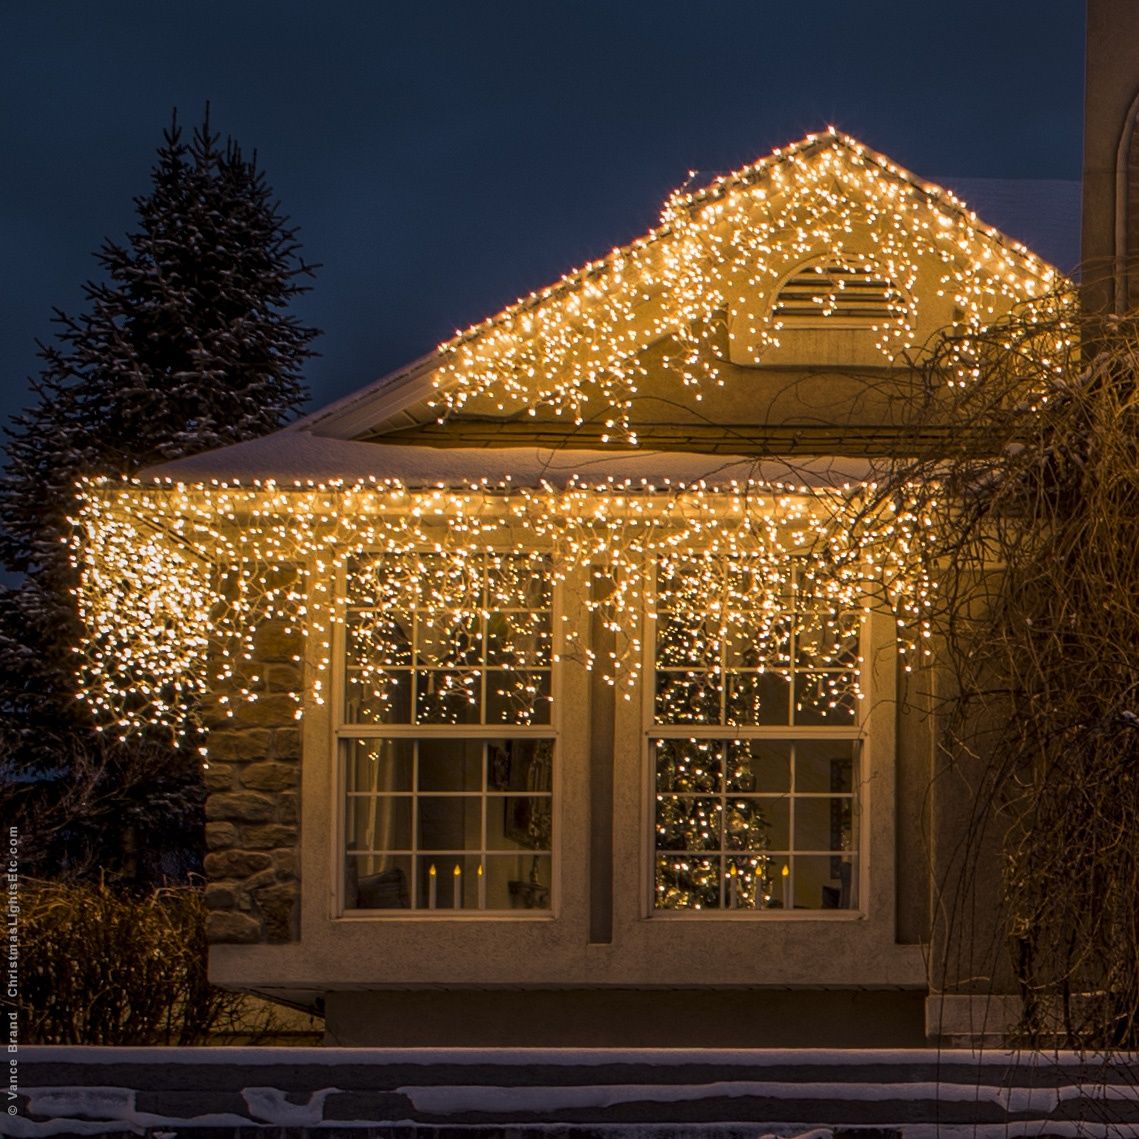 Outdoor Christmas Lights Brighten Up Your Holidays with Festive Outdoor Illumination